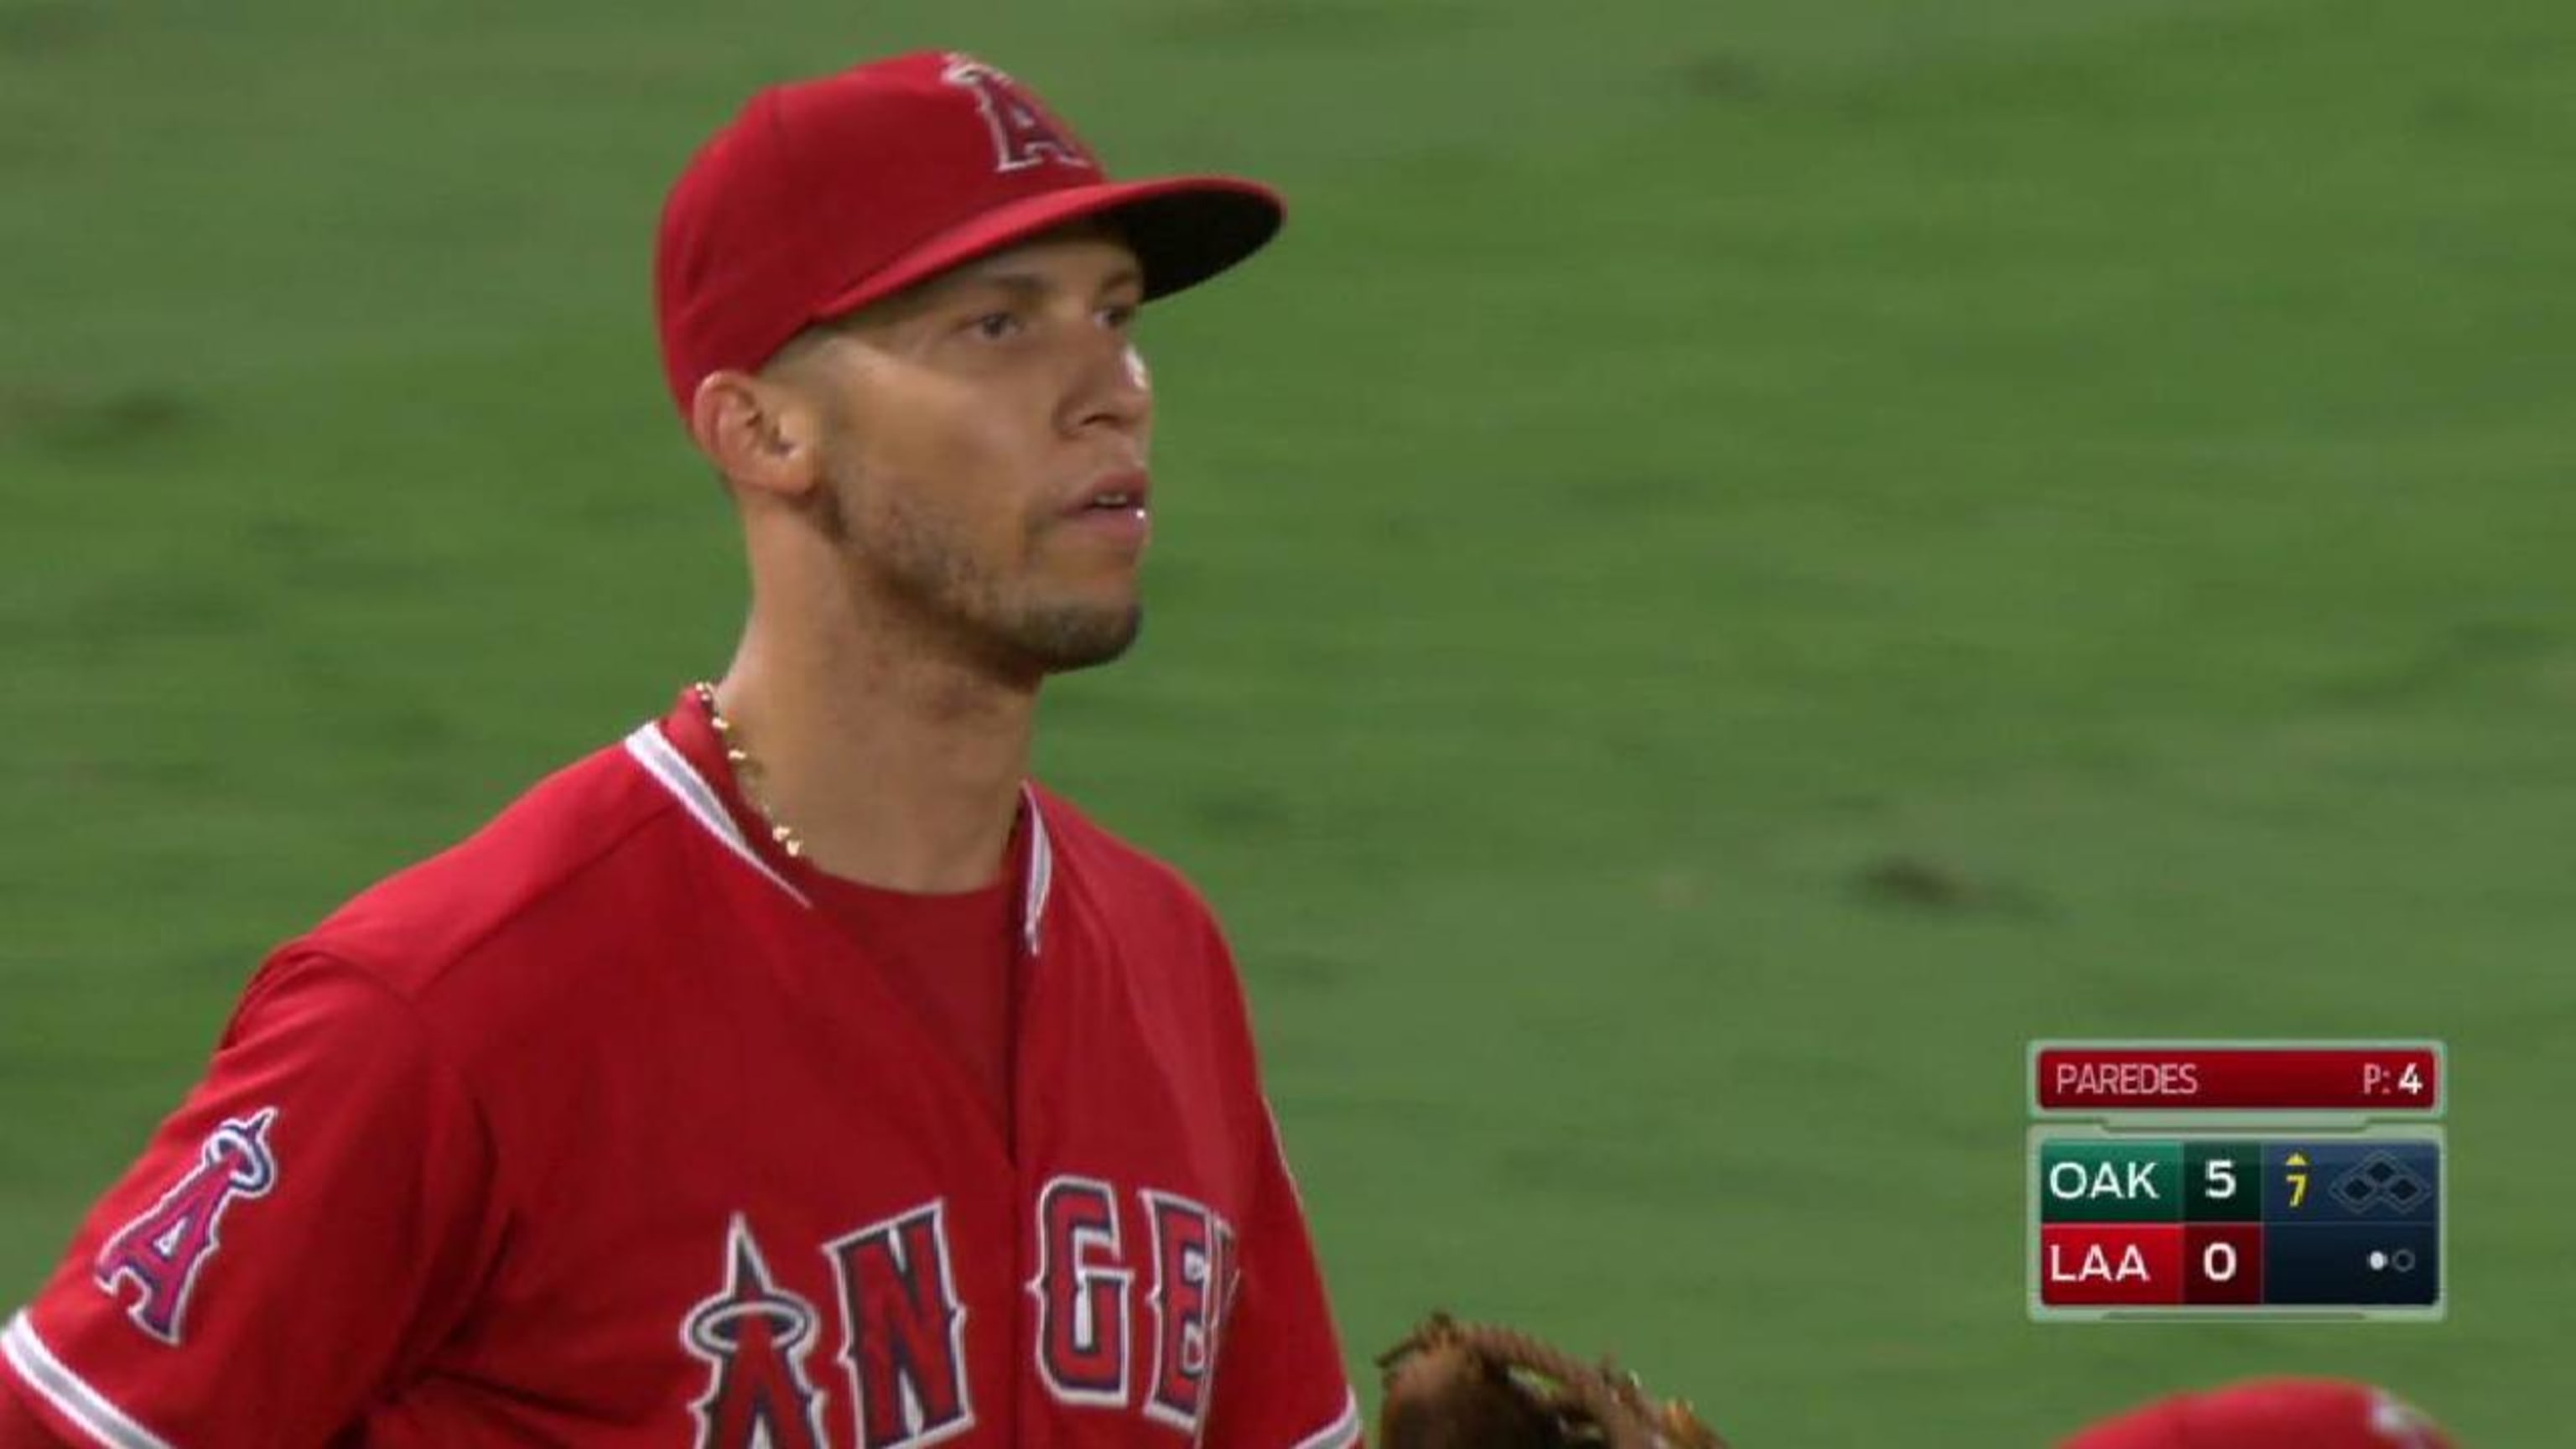 New Twins shortstop Andrelton Simmons is a dazzling defender